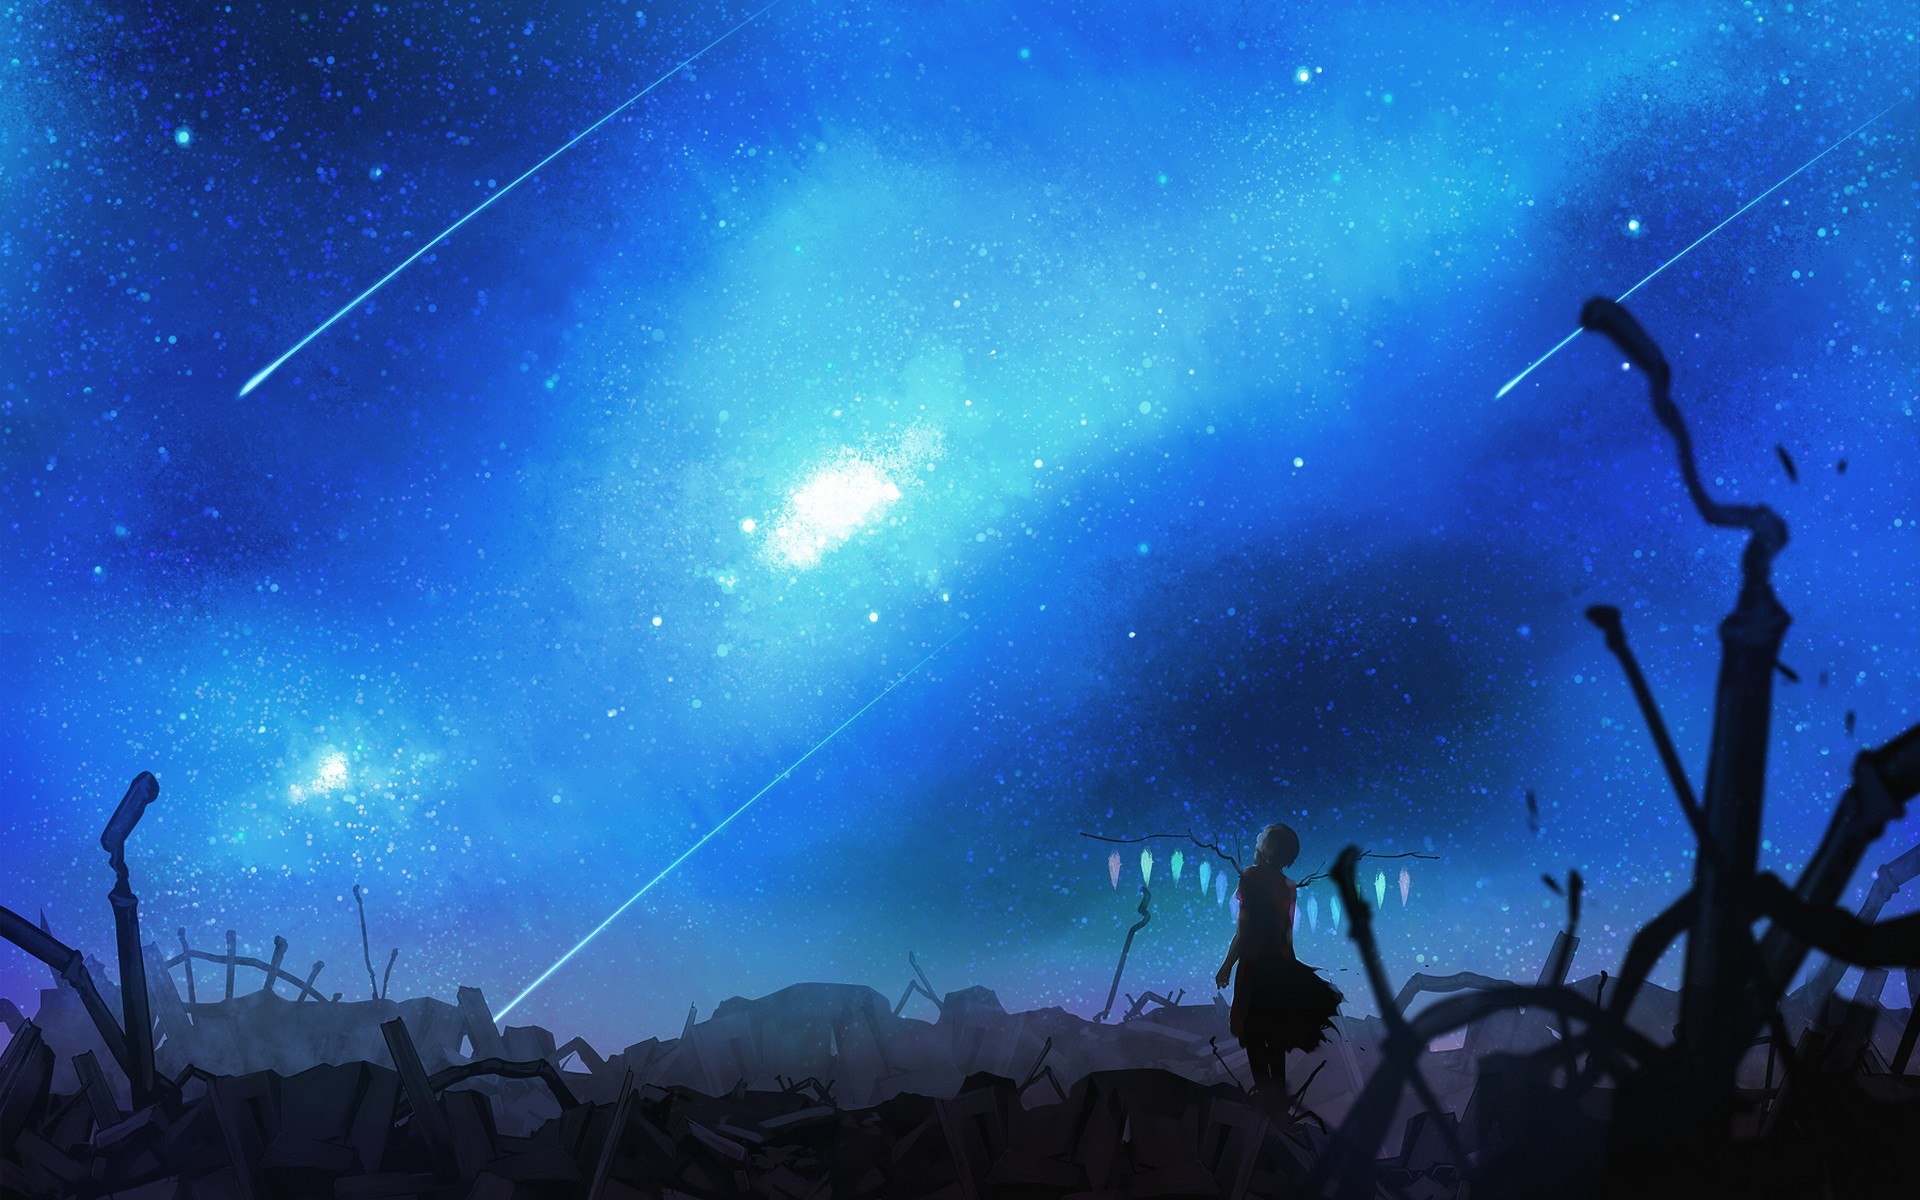 Anime scenery wallpaper 1920x1200 - (#30029) - High Quality and ...